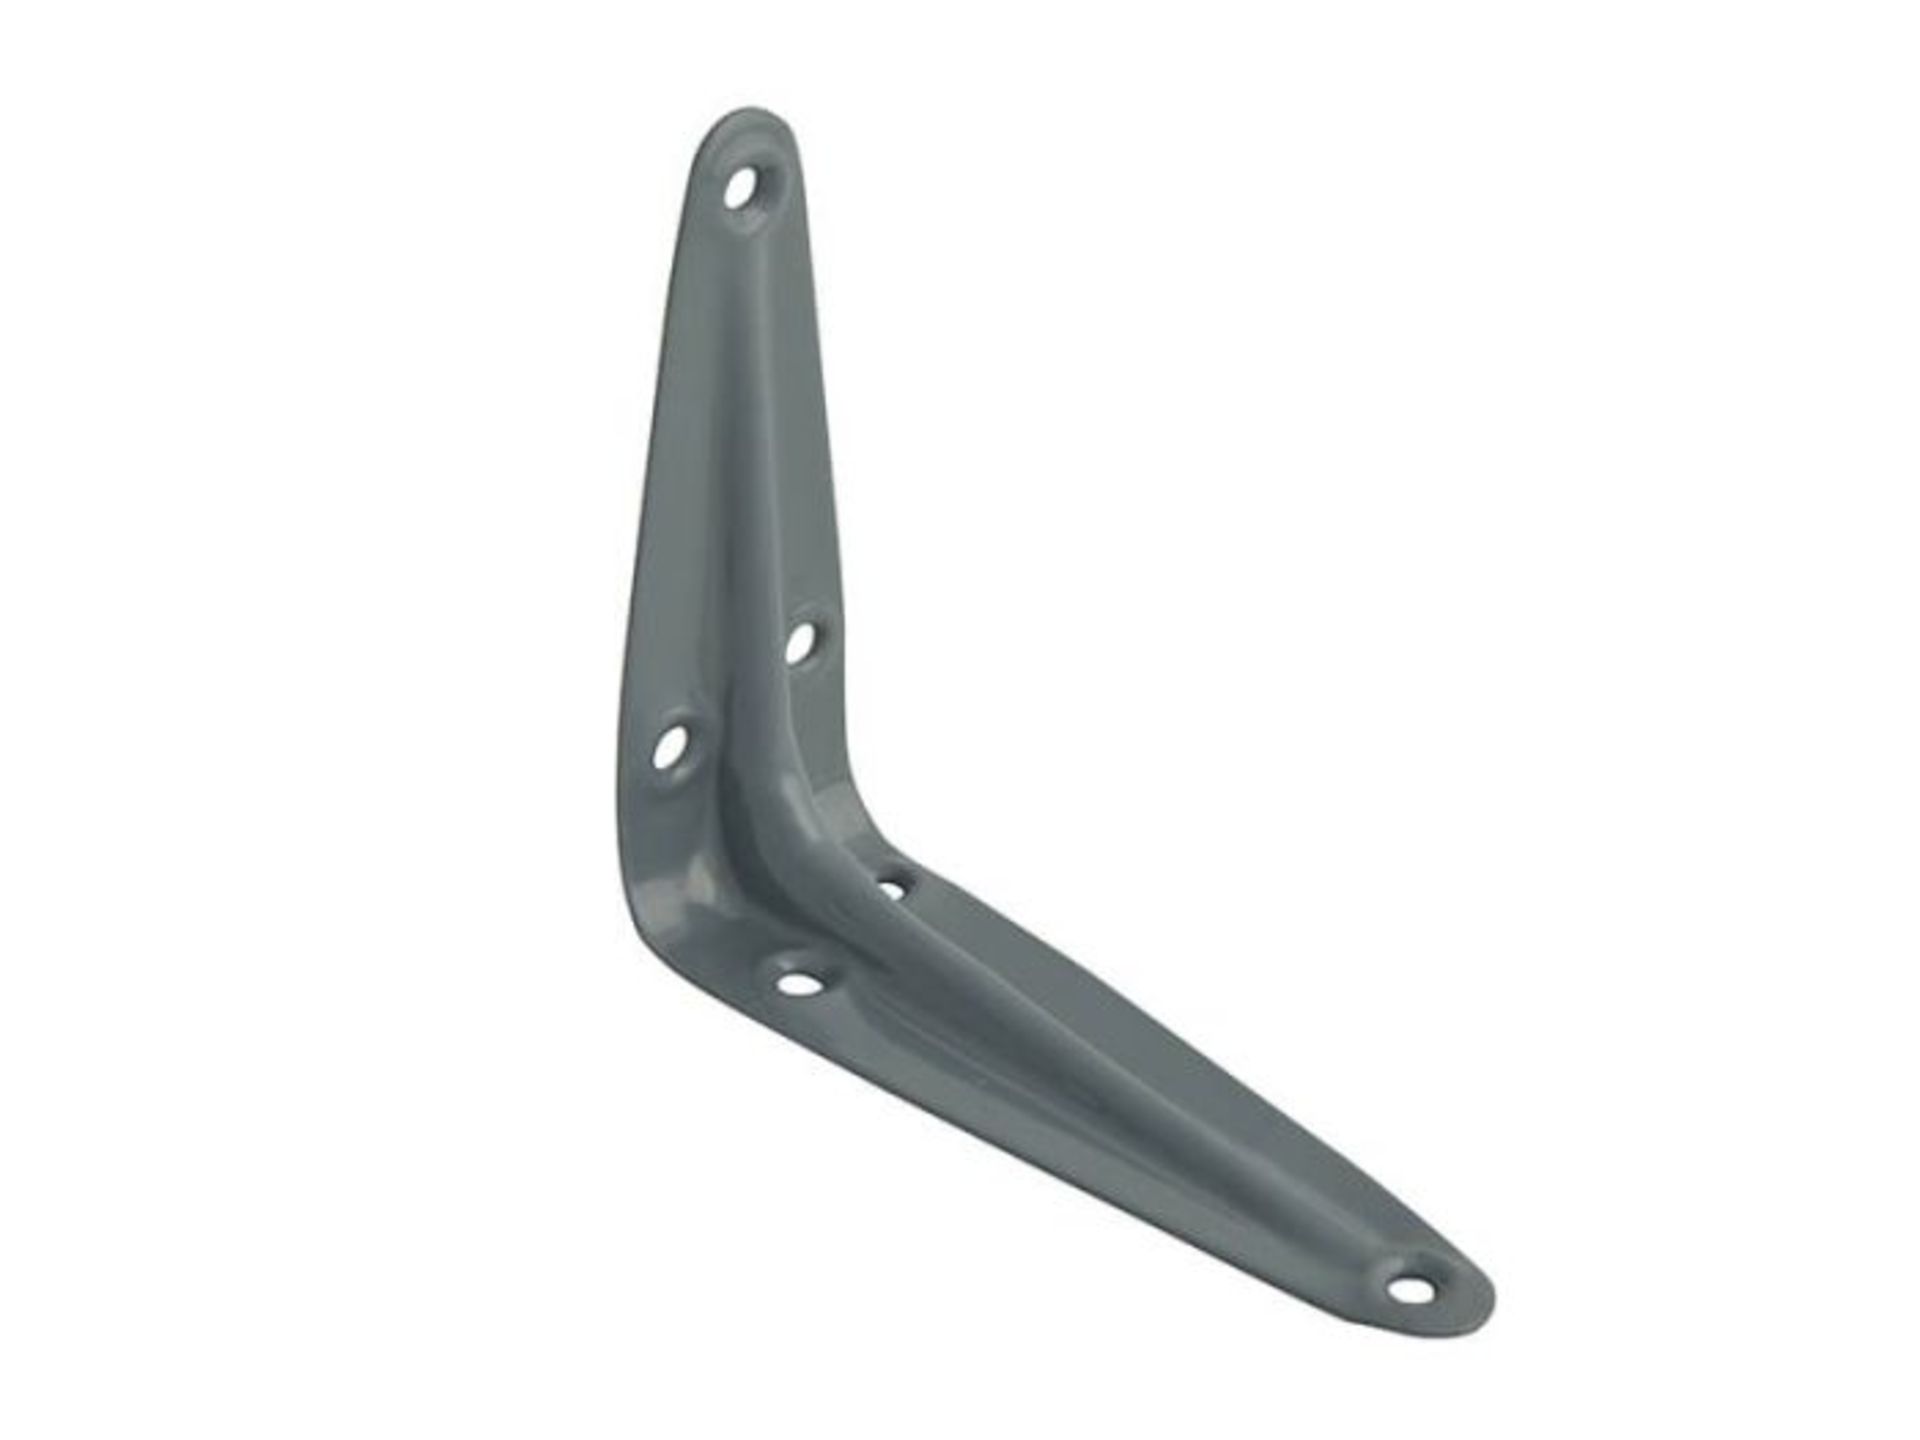 Pack of 40 Forge London Pattern Shelf Brackets Grey 3"" x 4"" RRP £14 - Image 2 of 2